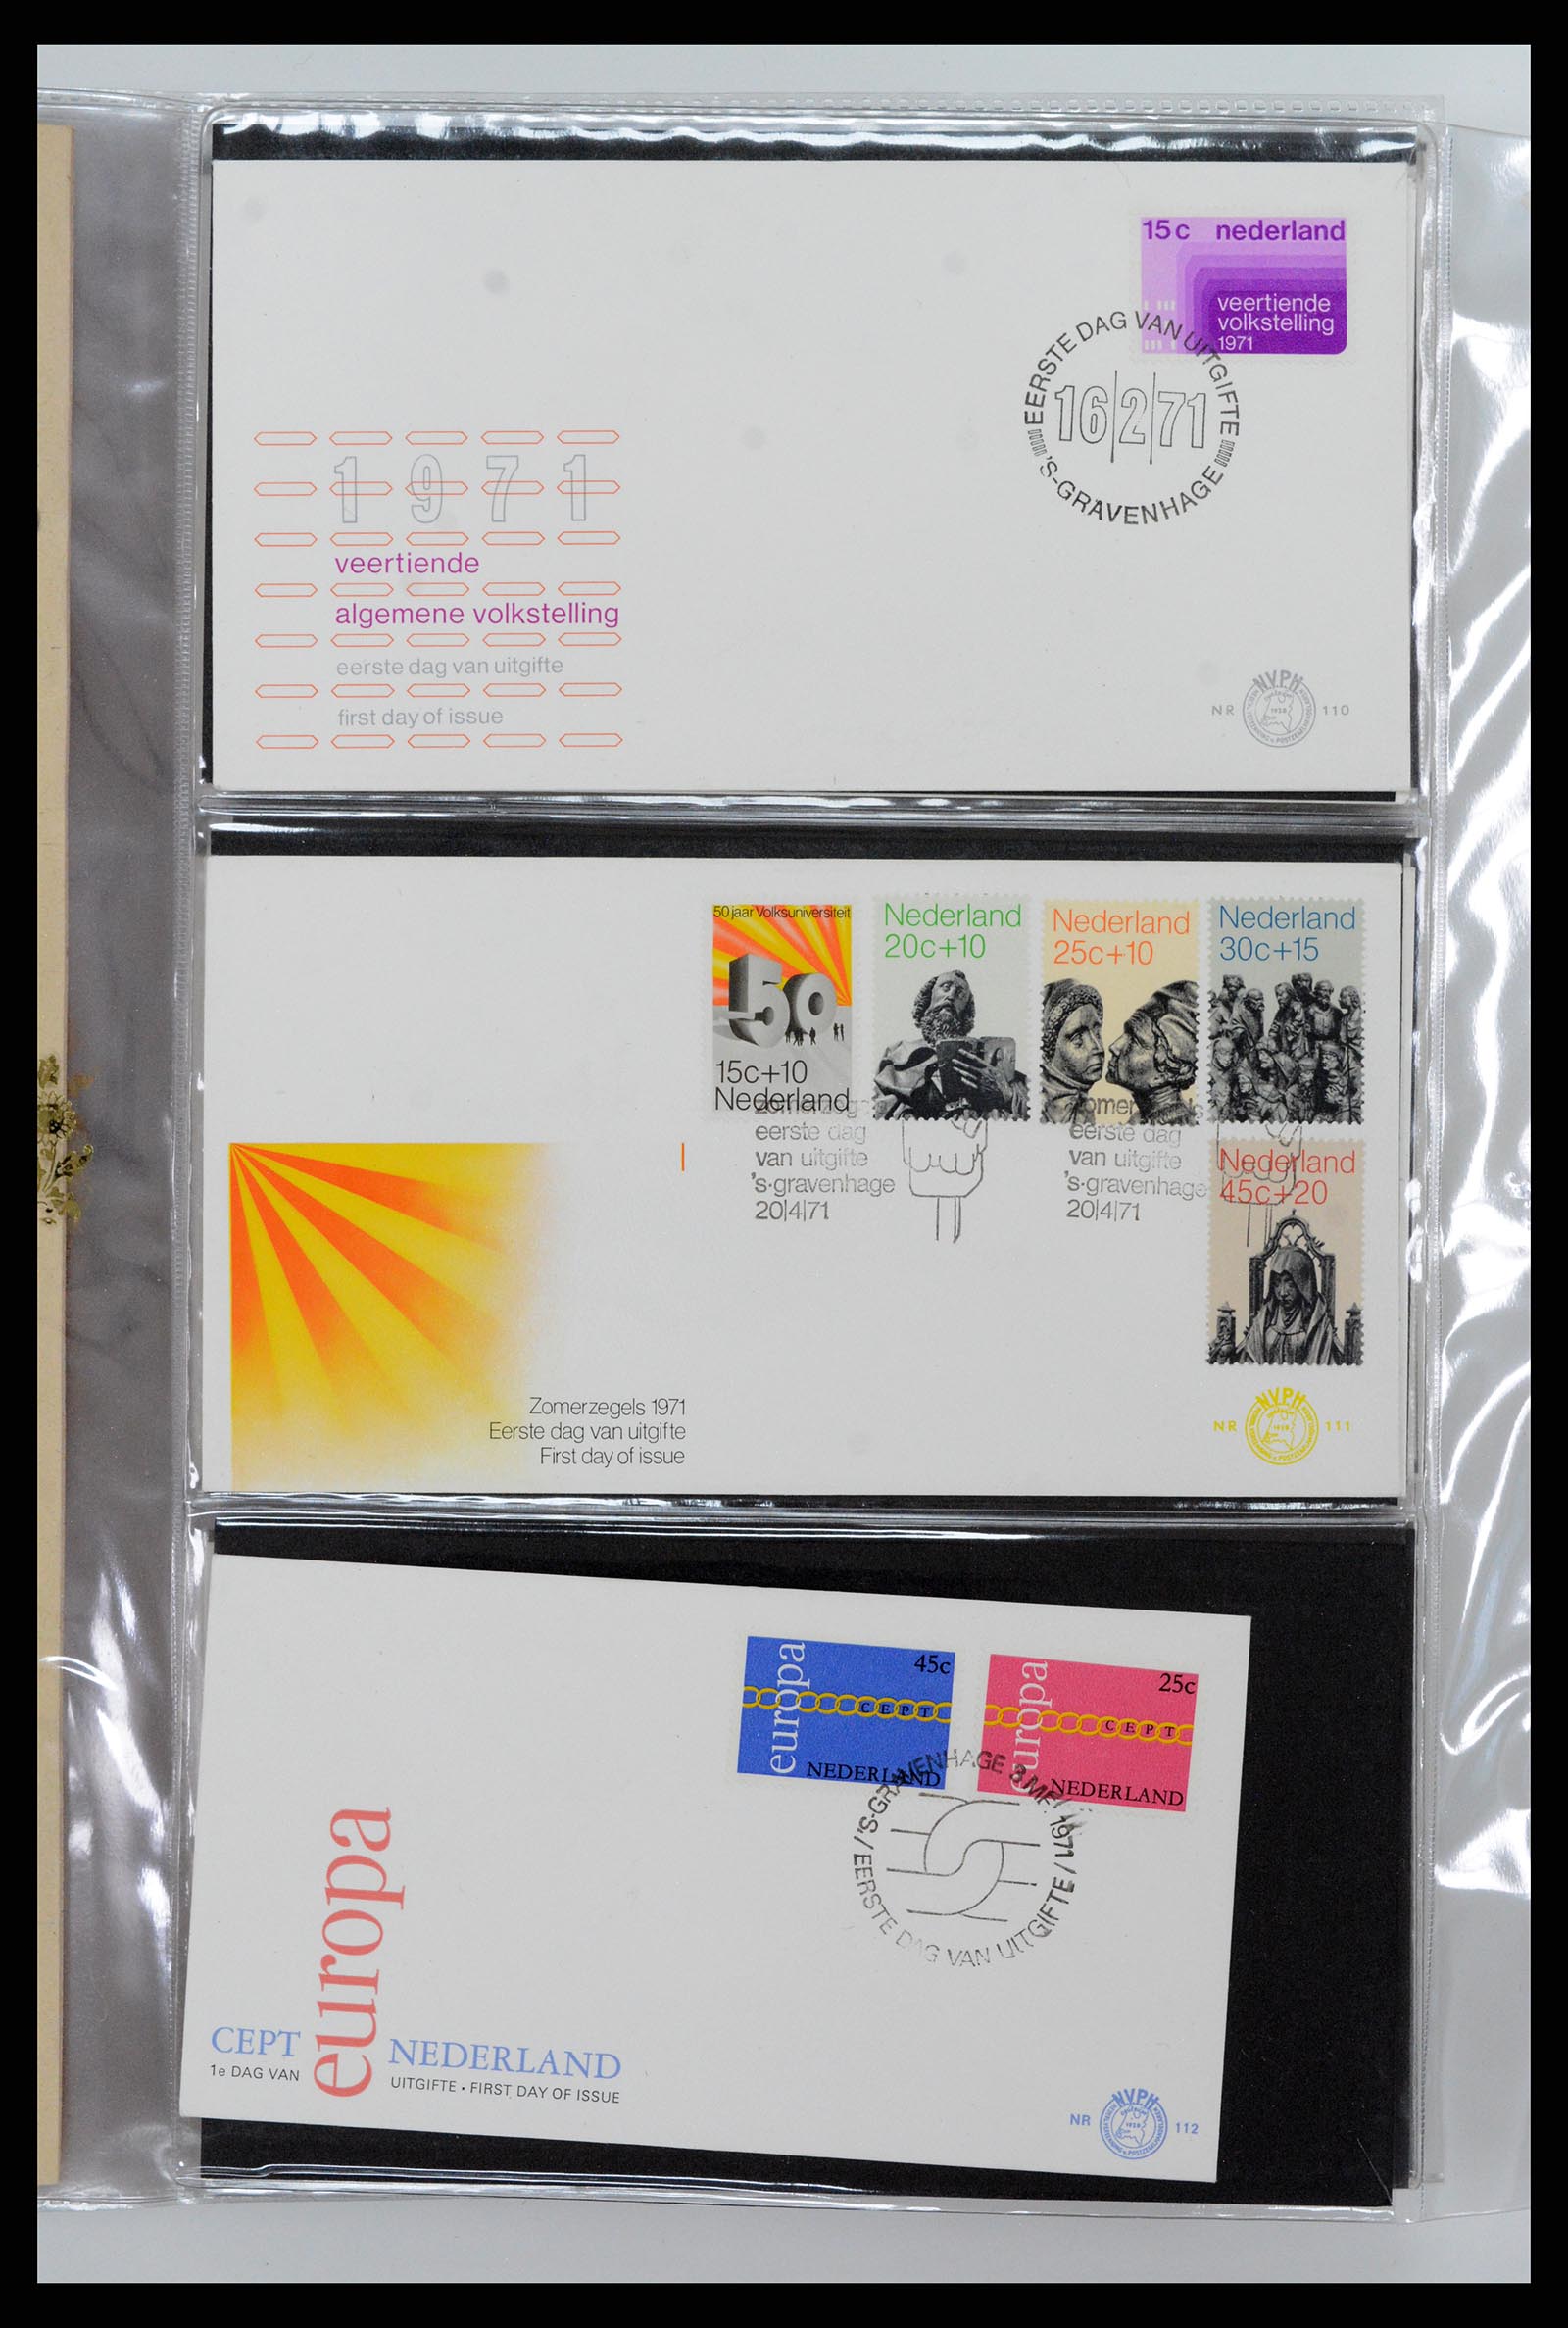 37461 040 - Stamp collection 37461 Netherlands FDC's 1950-2014.